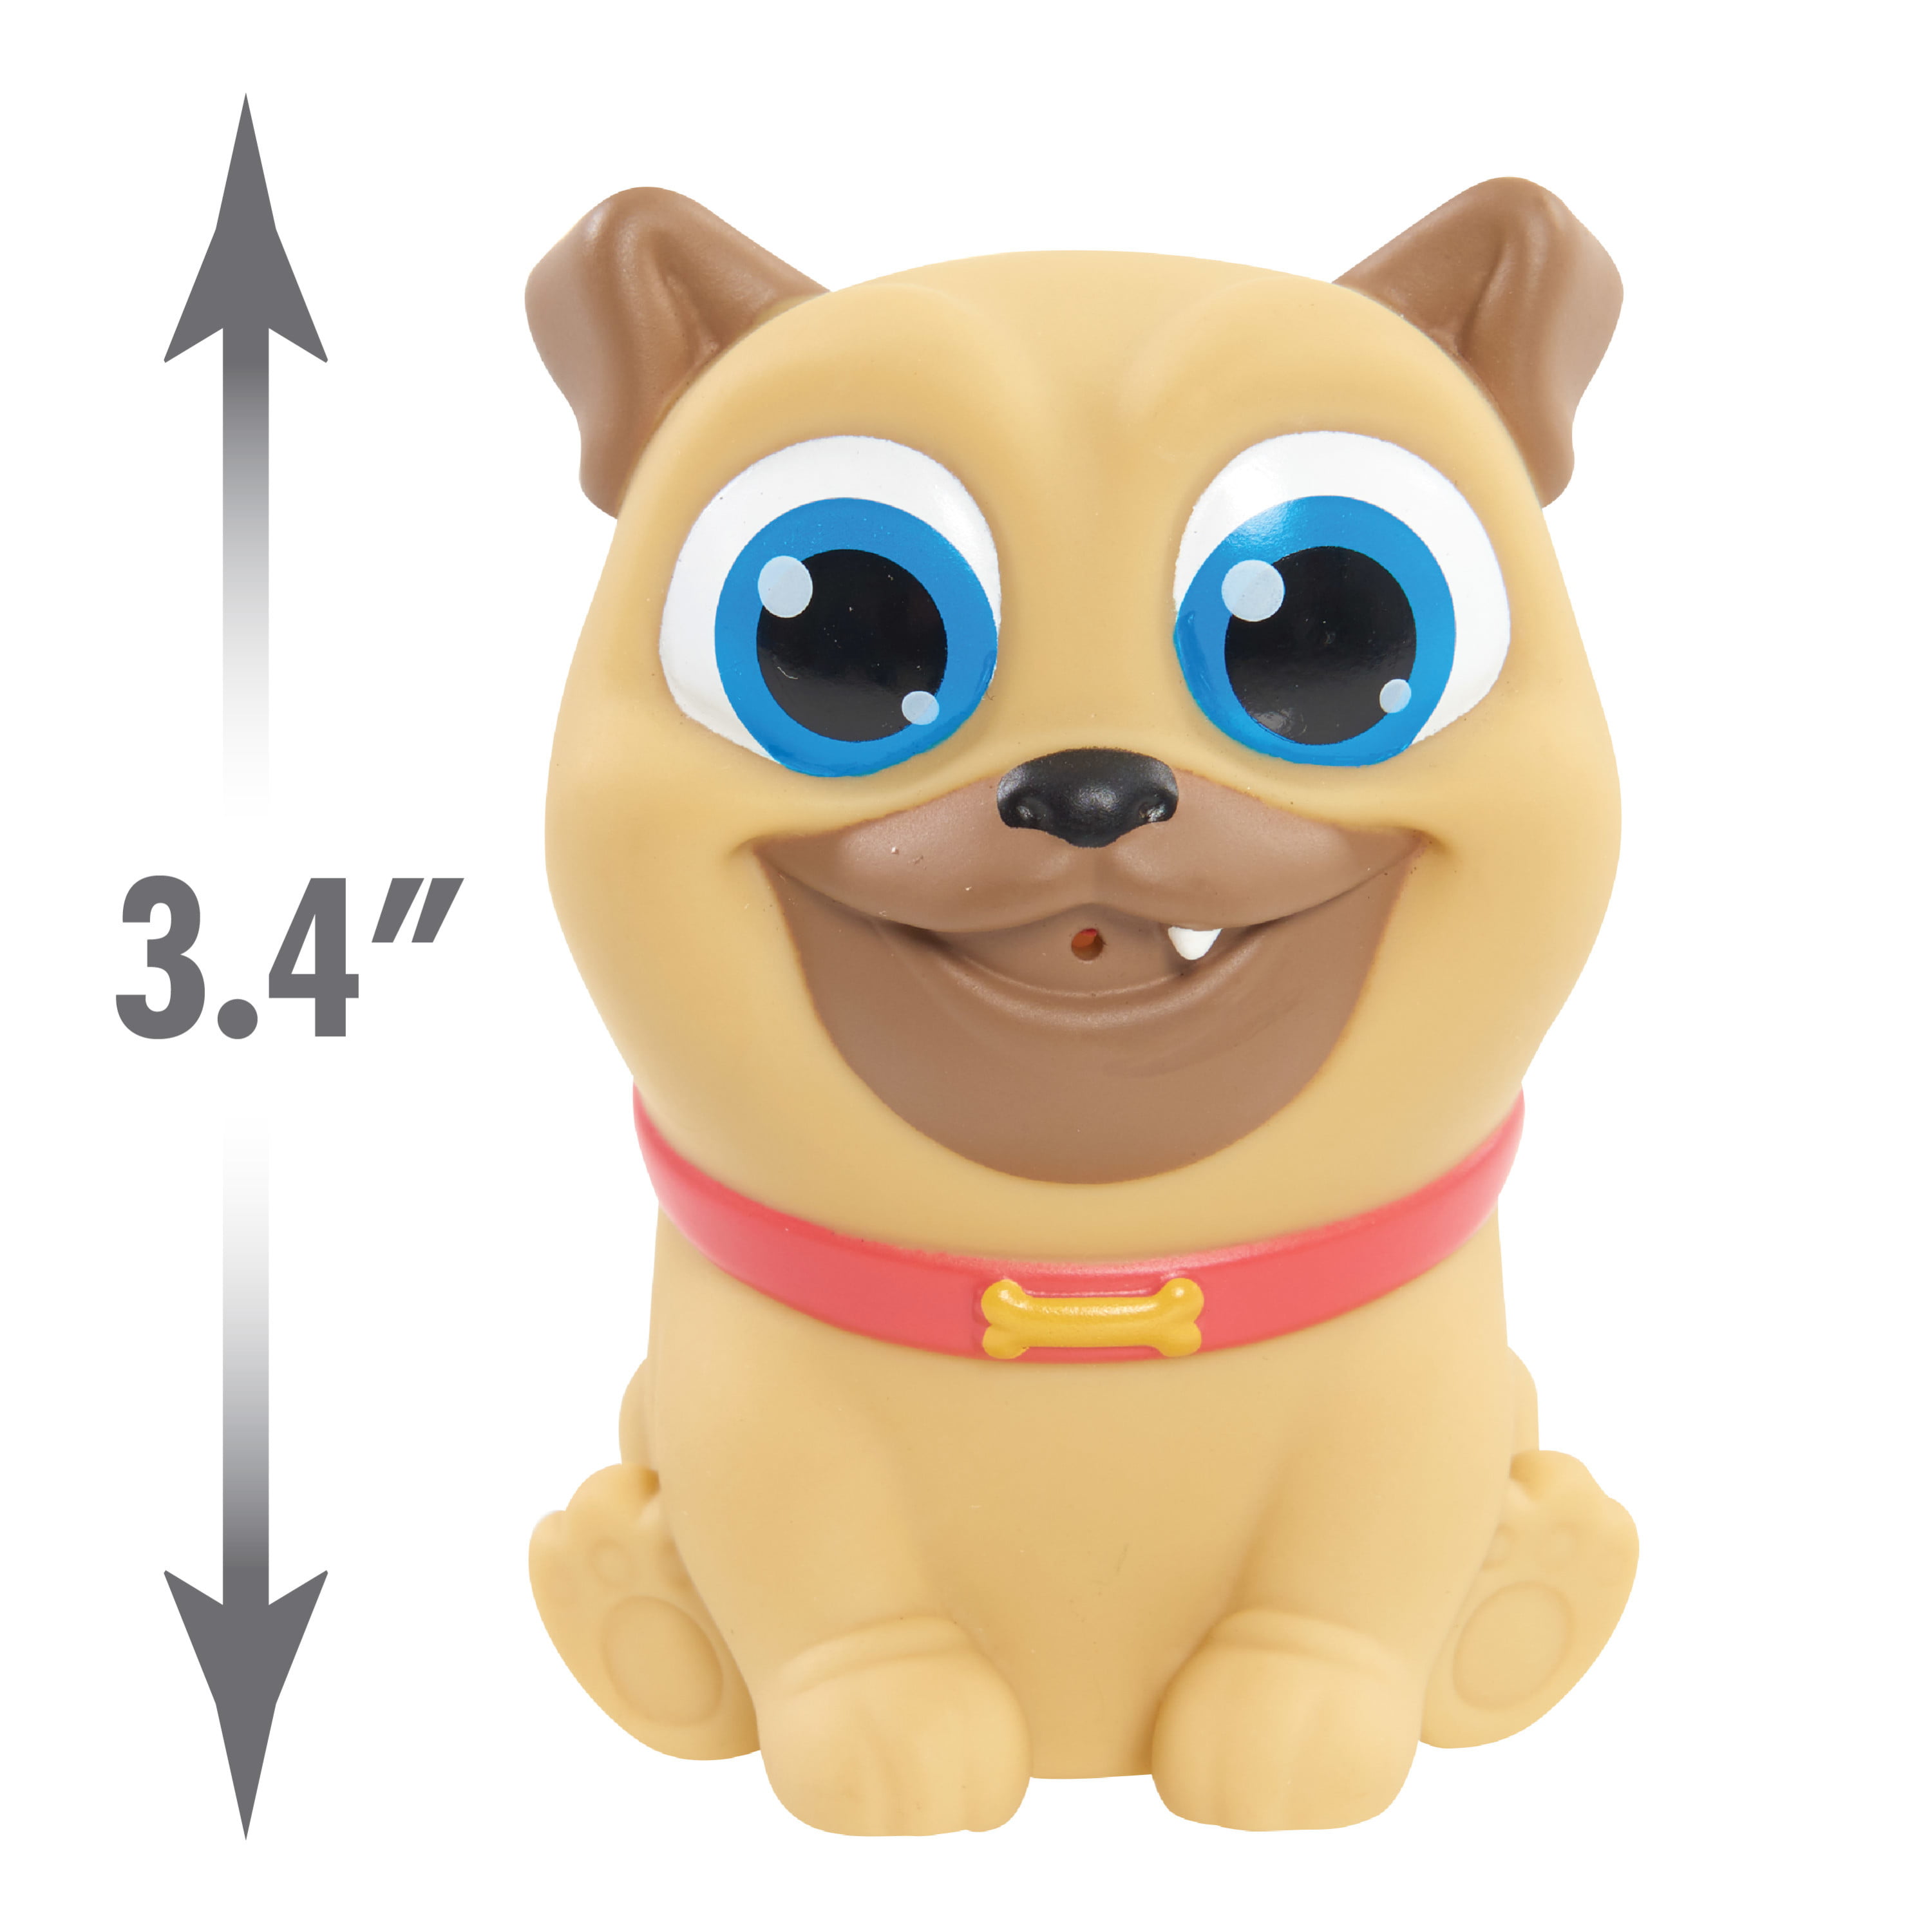 Puppy Dog Pals Bath Toys, Bingo & Rolly 2 Pack, Officially Licensed Kids  Toys for Ages 3 Up by Just Play